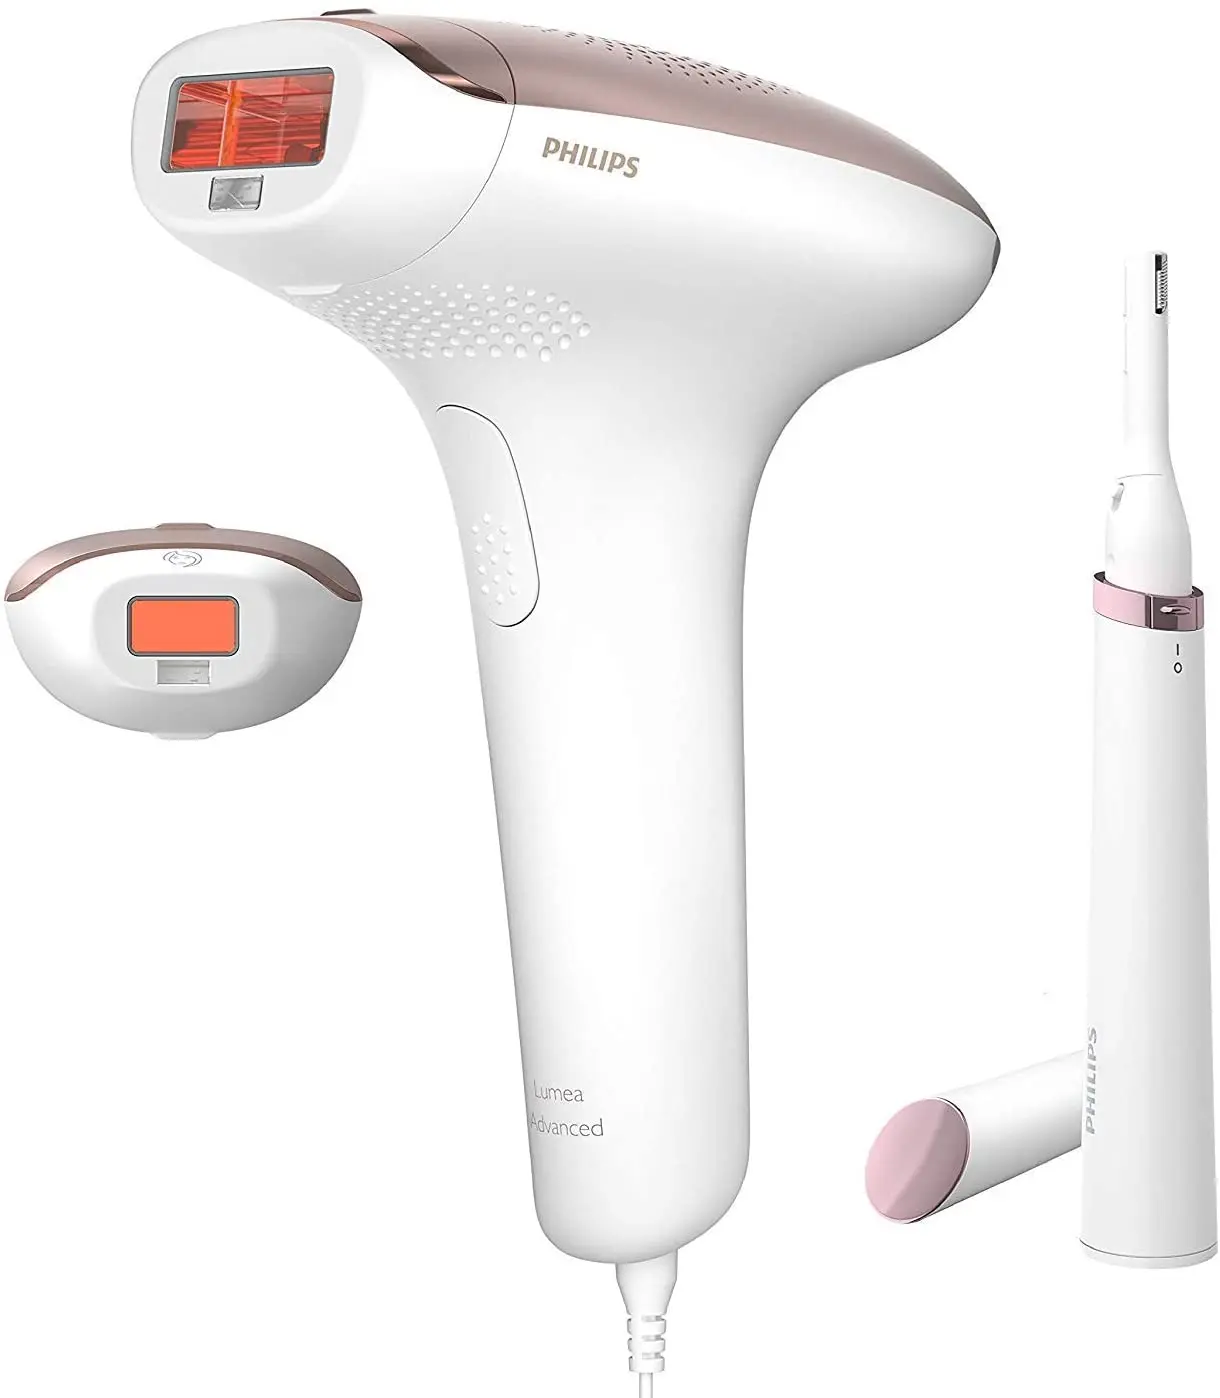 

Laser Hair Removal Philips Bri921/00 Lumea Advanced Ipl Hair Removal Tool - Satin Compact Pen with Trimmer Gift